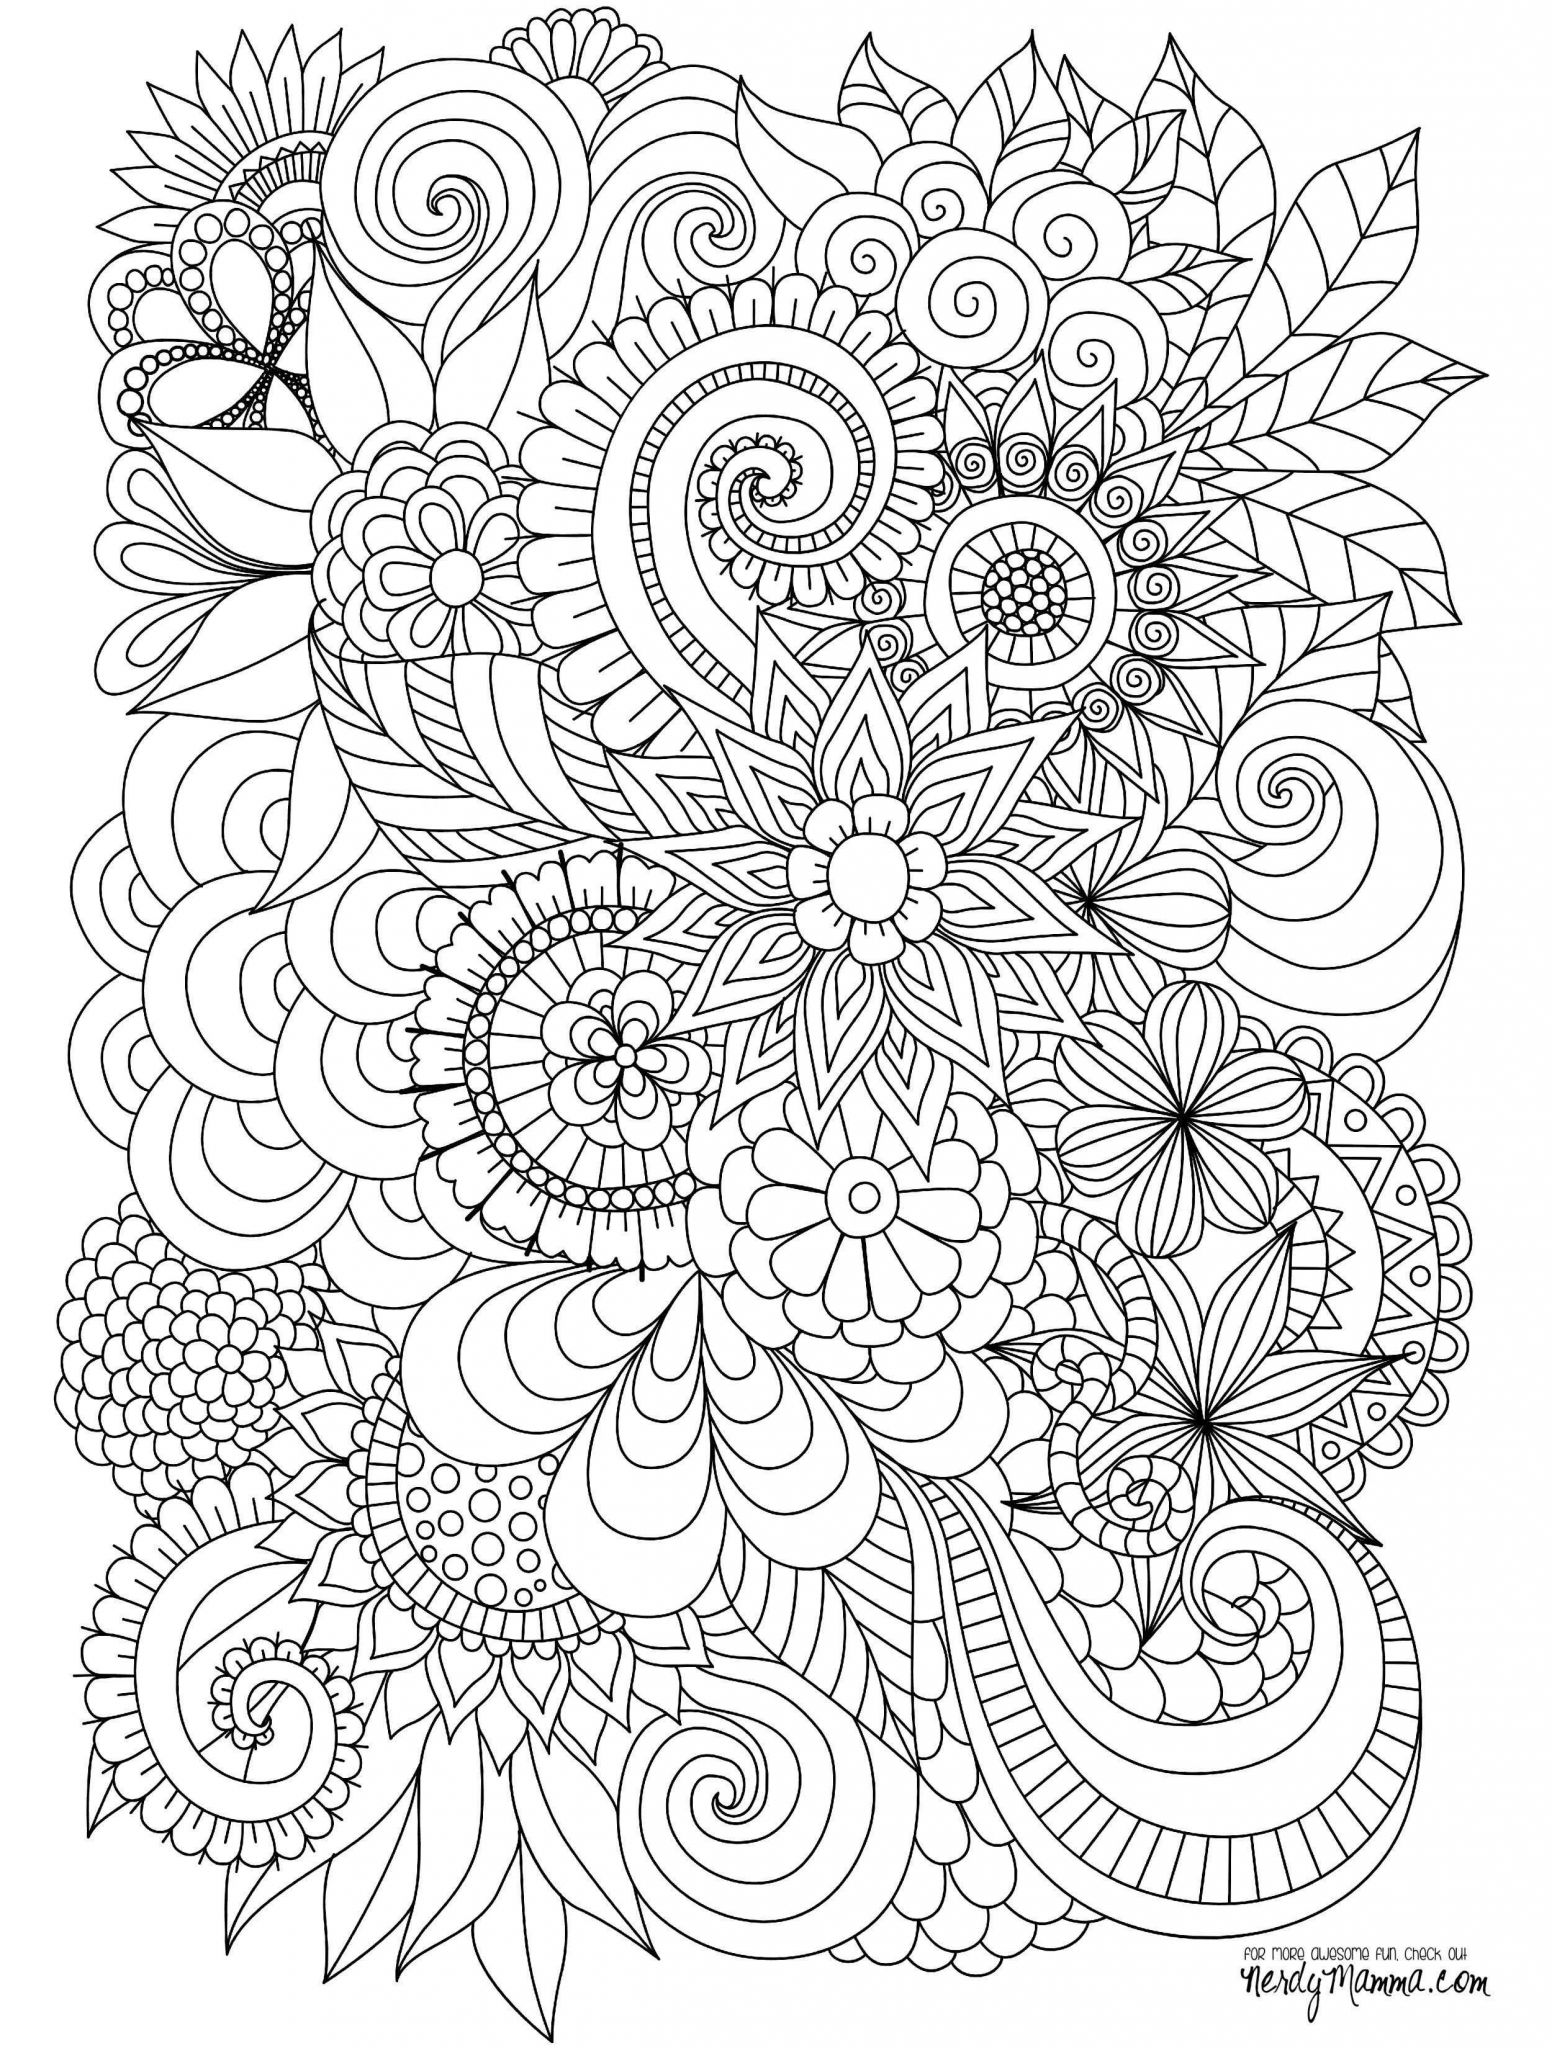 Stress Management Worksheets together with Stress Relief Coloring Pages Lovely Flowers Abstract Coloring Pages